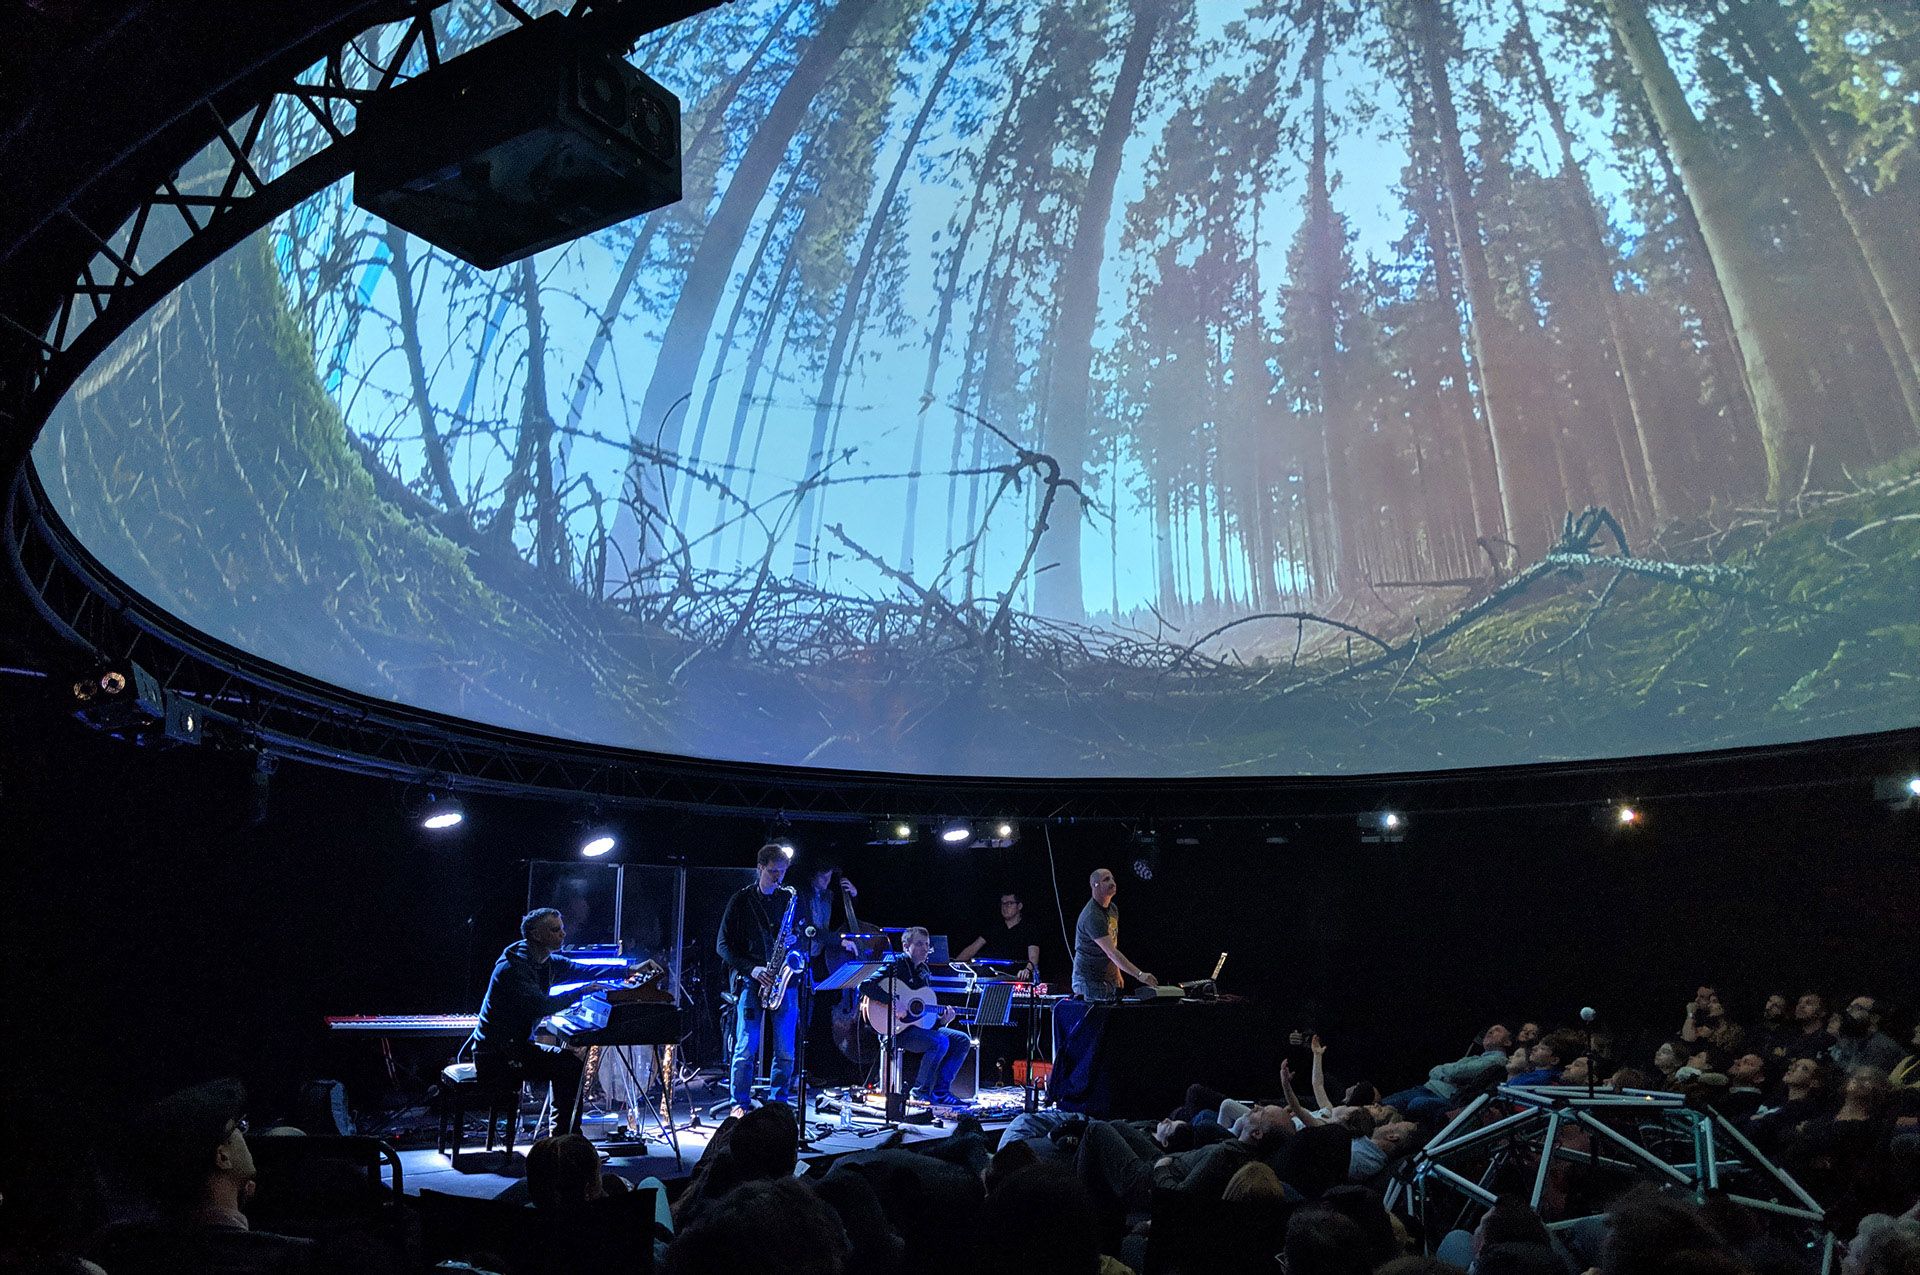 Live performance in a dome theater